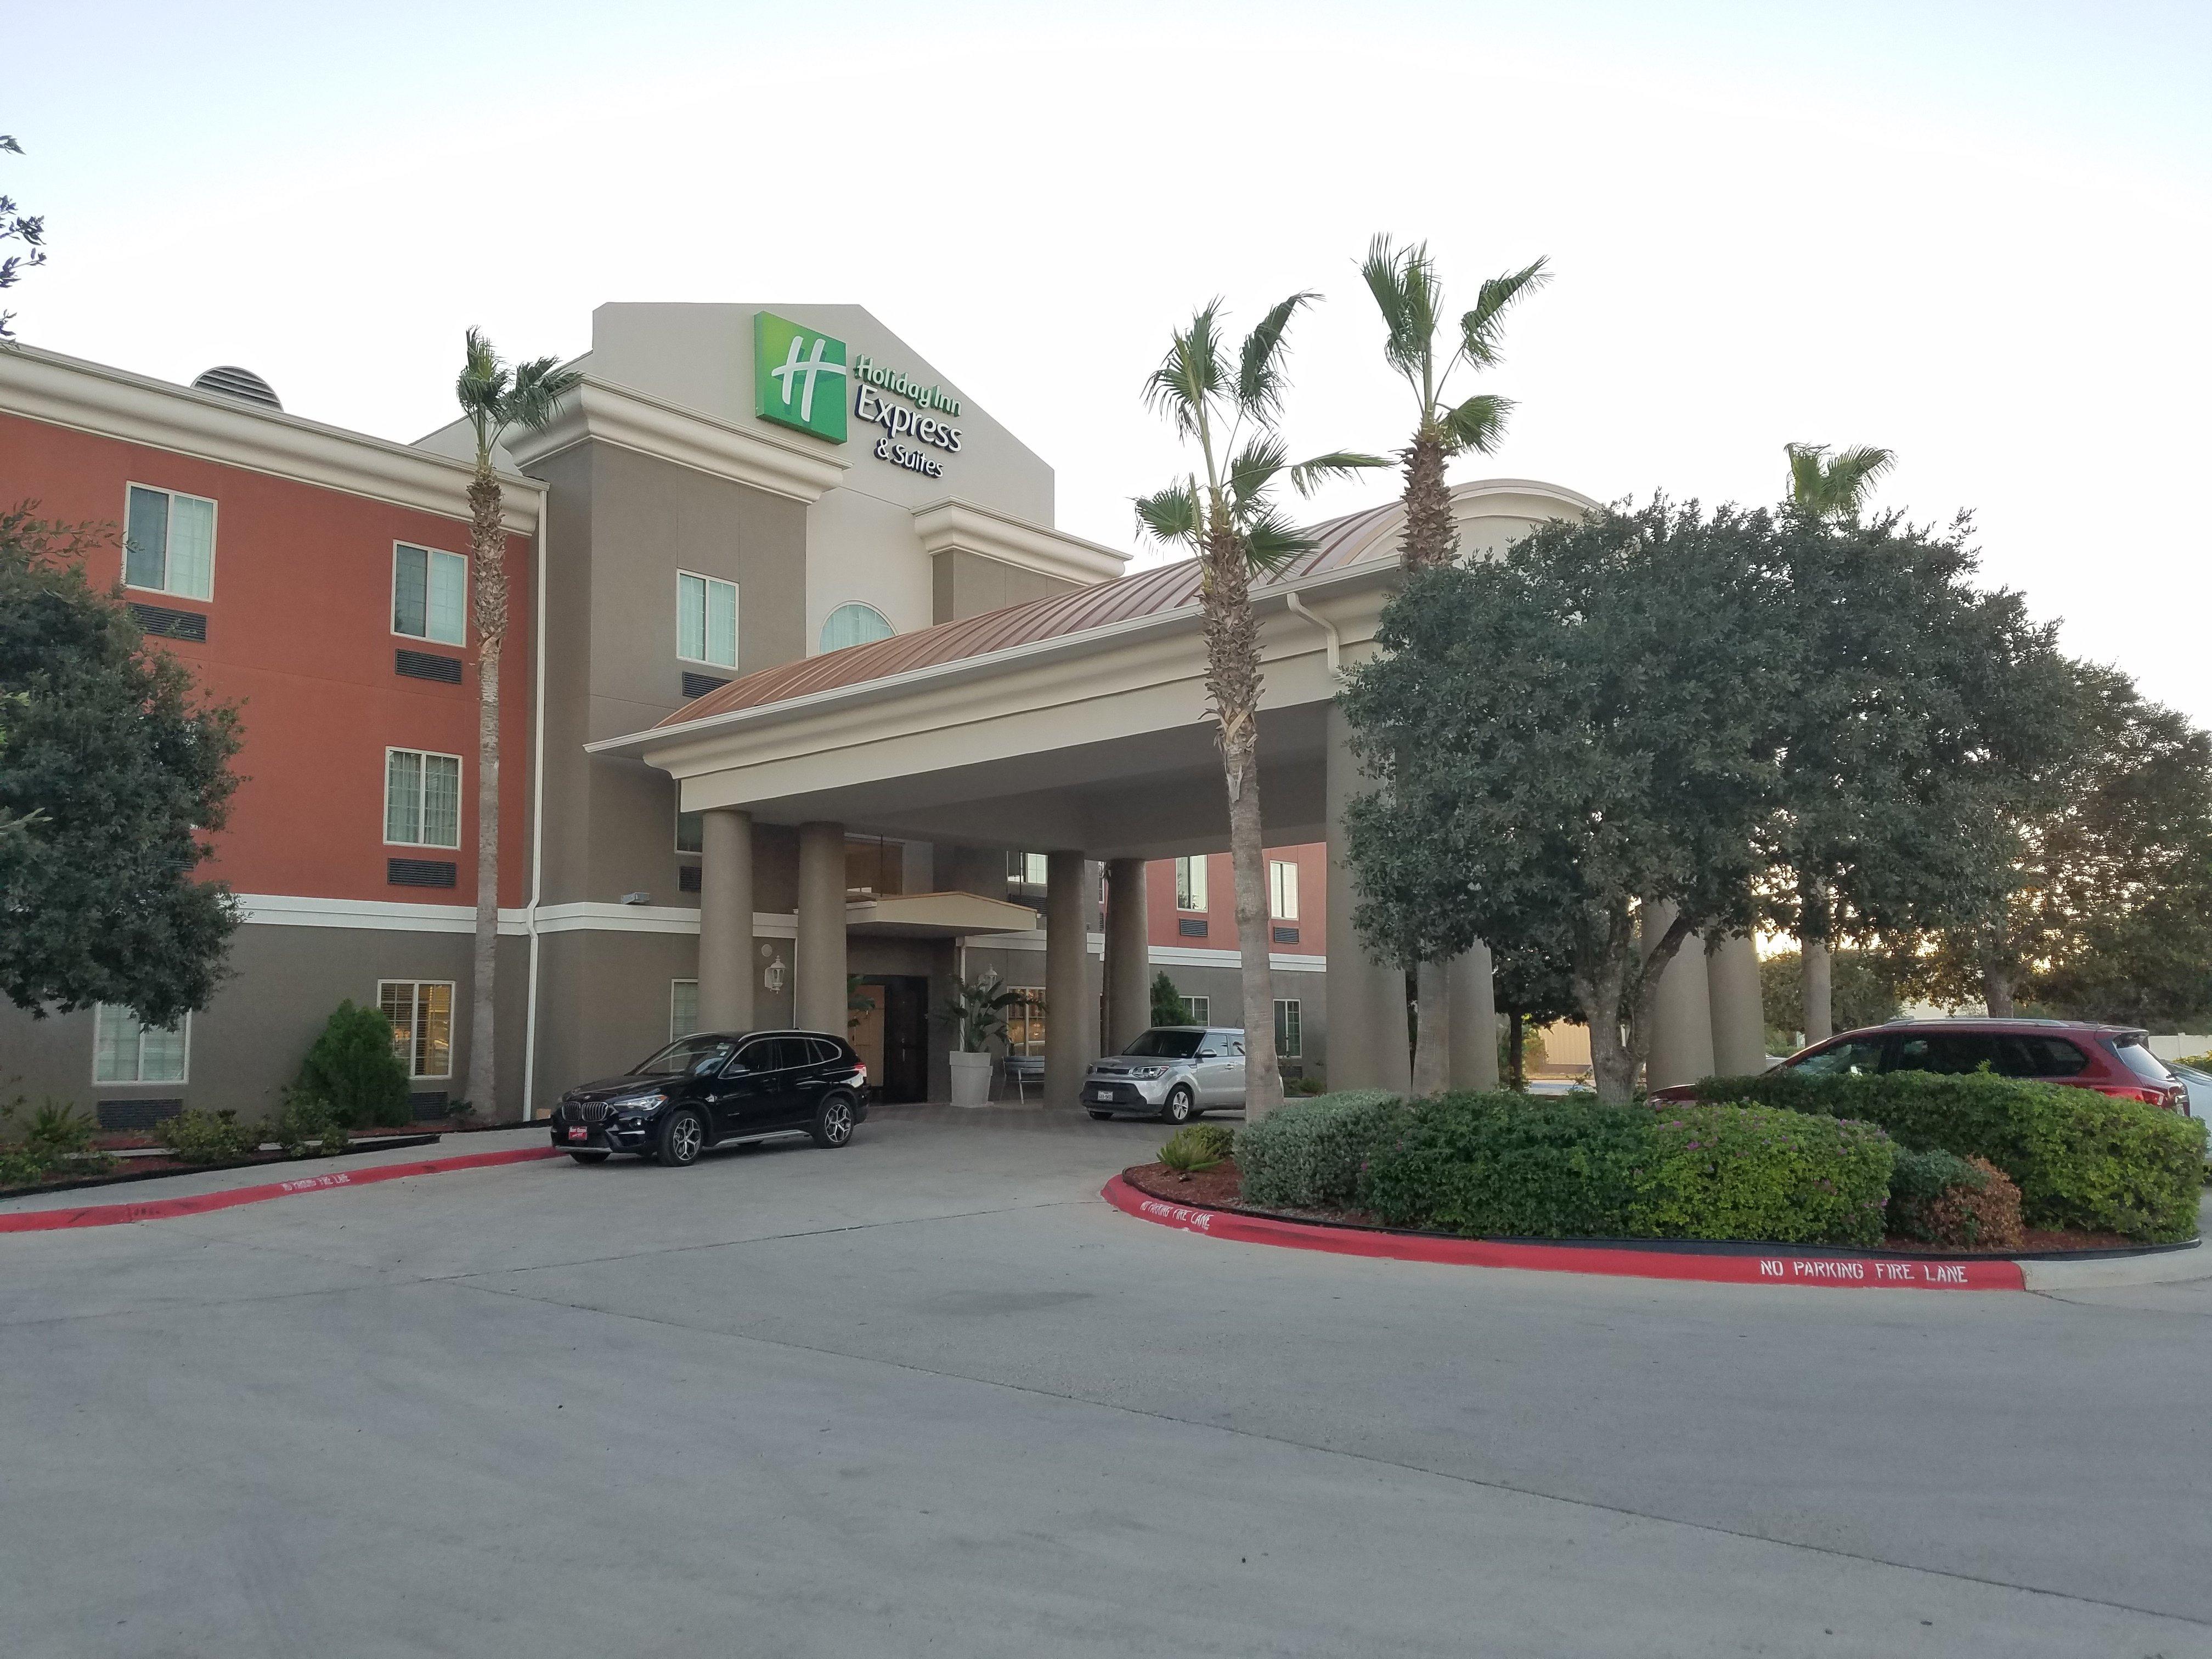 HOLIDAY INN EXPRESS HOTEL AND SUITES RIO GRANDE CITY